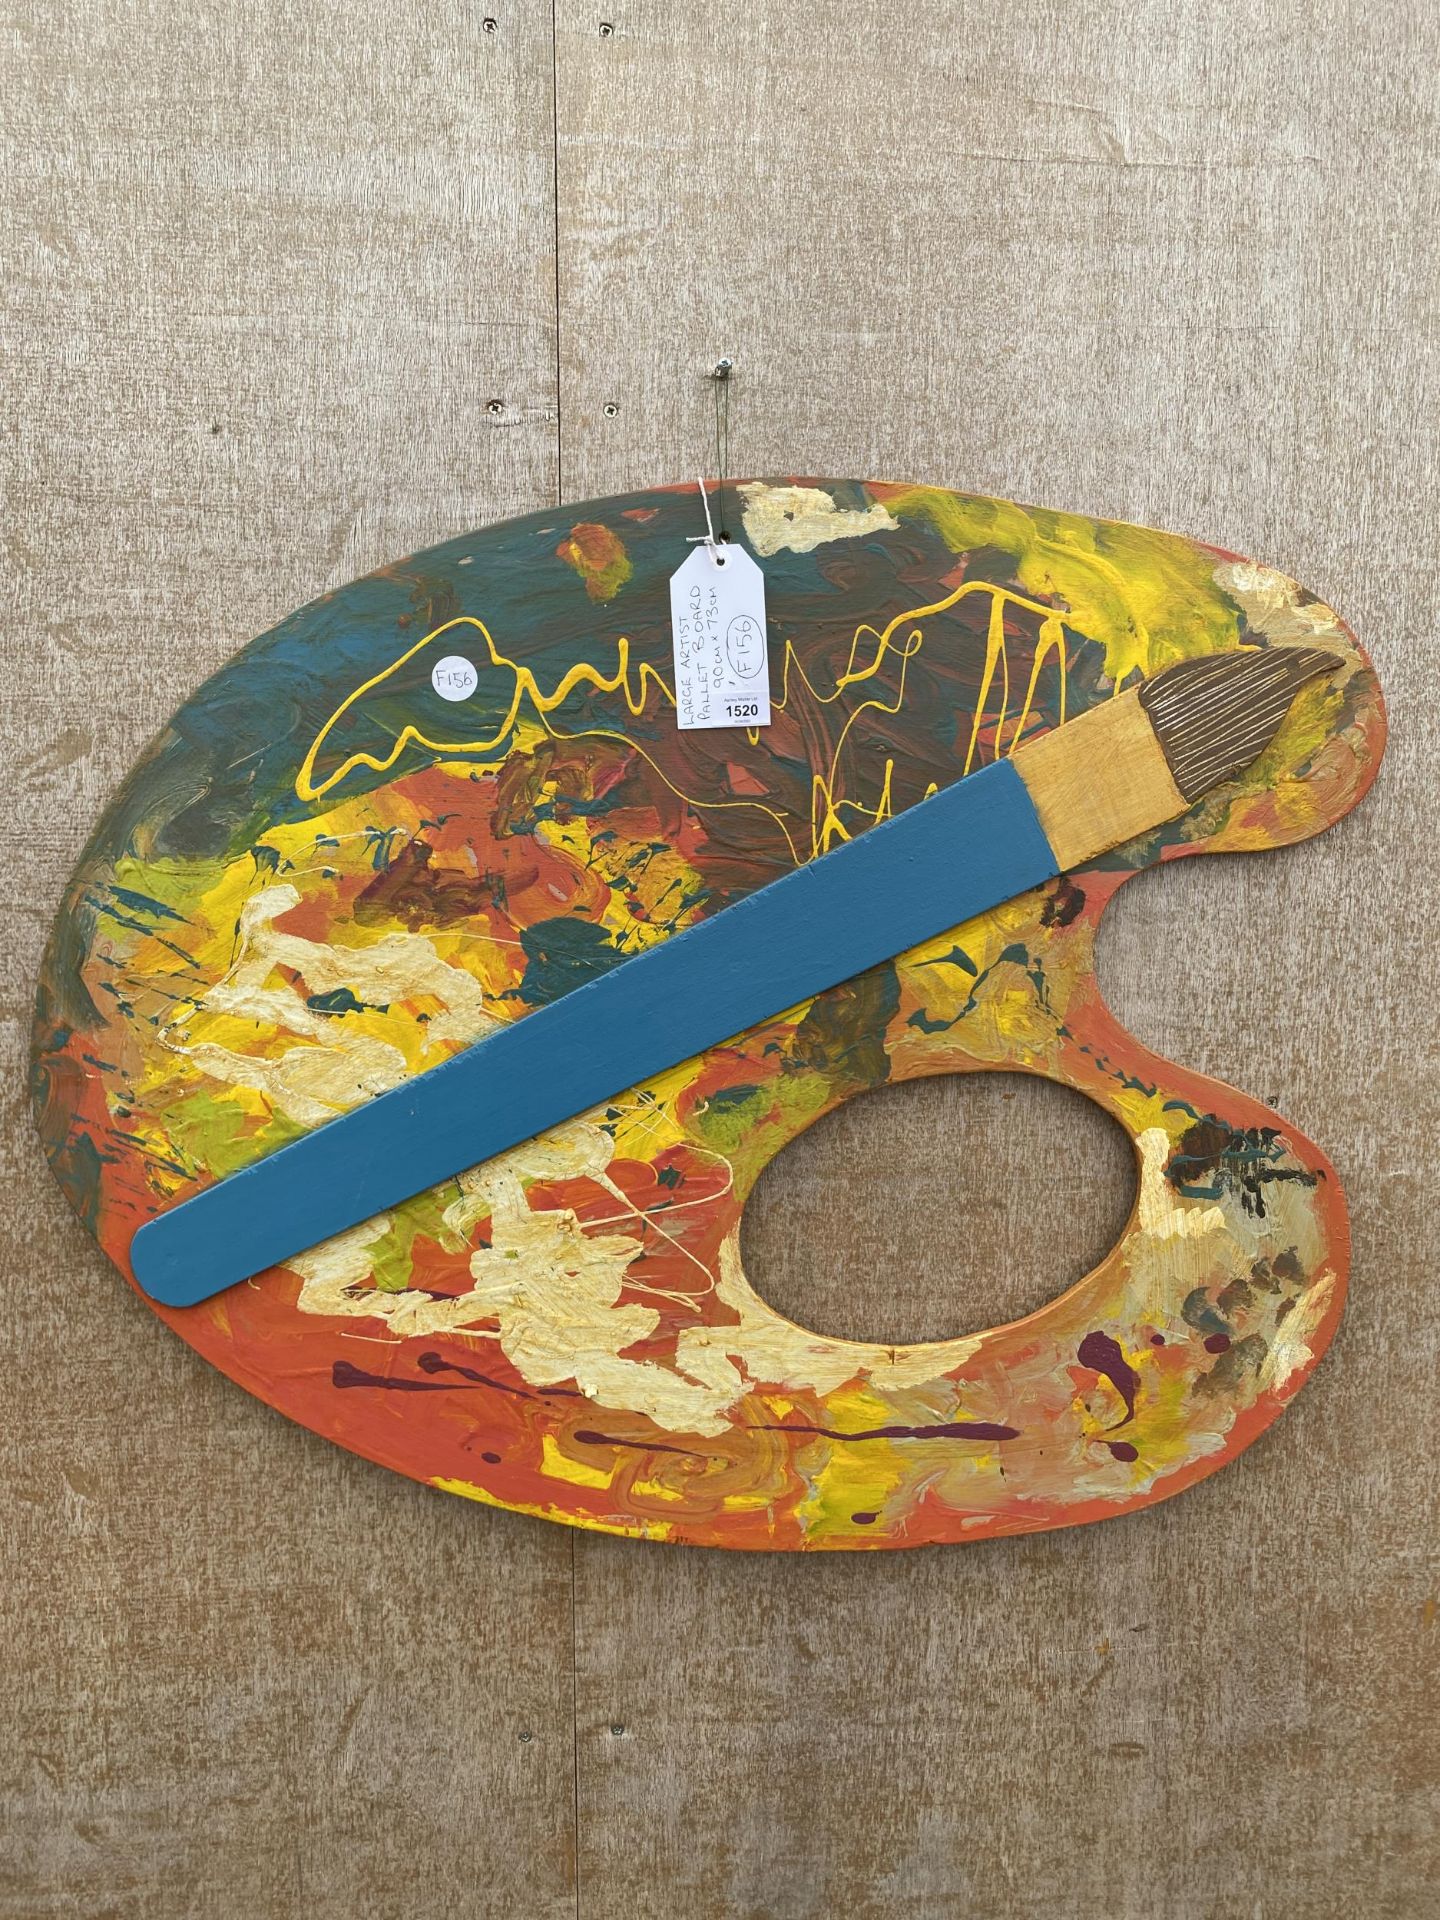 A LARGE HAND PAINTED WOODEN ARTIST PALLET BOARD (90CM x 73CM)